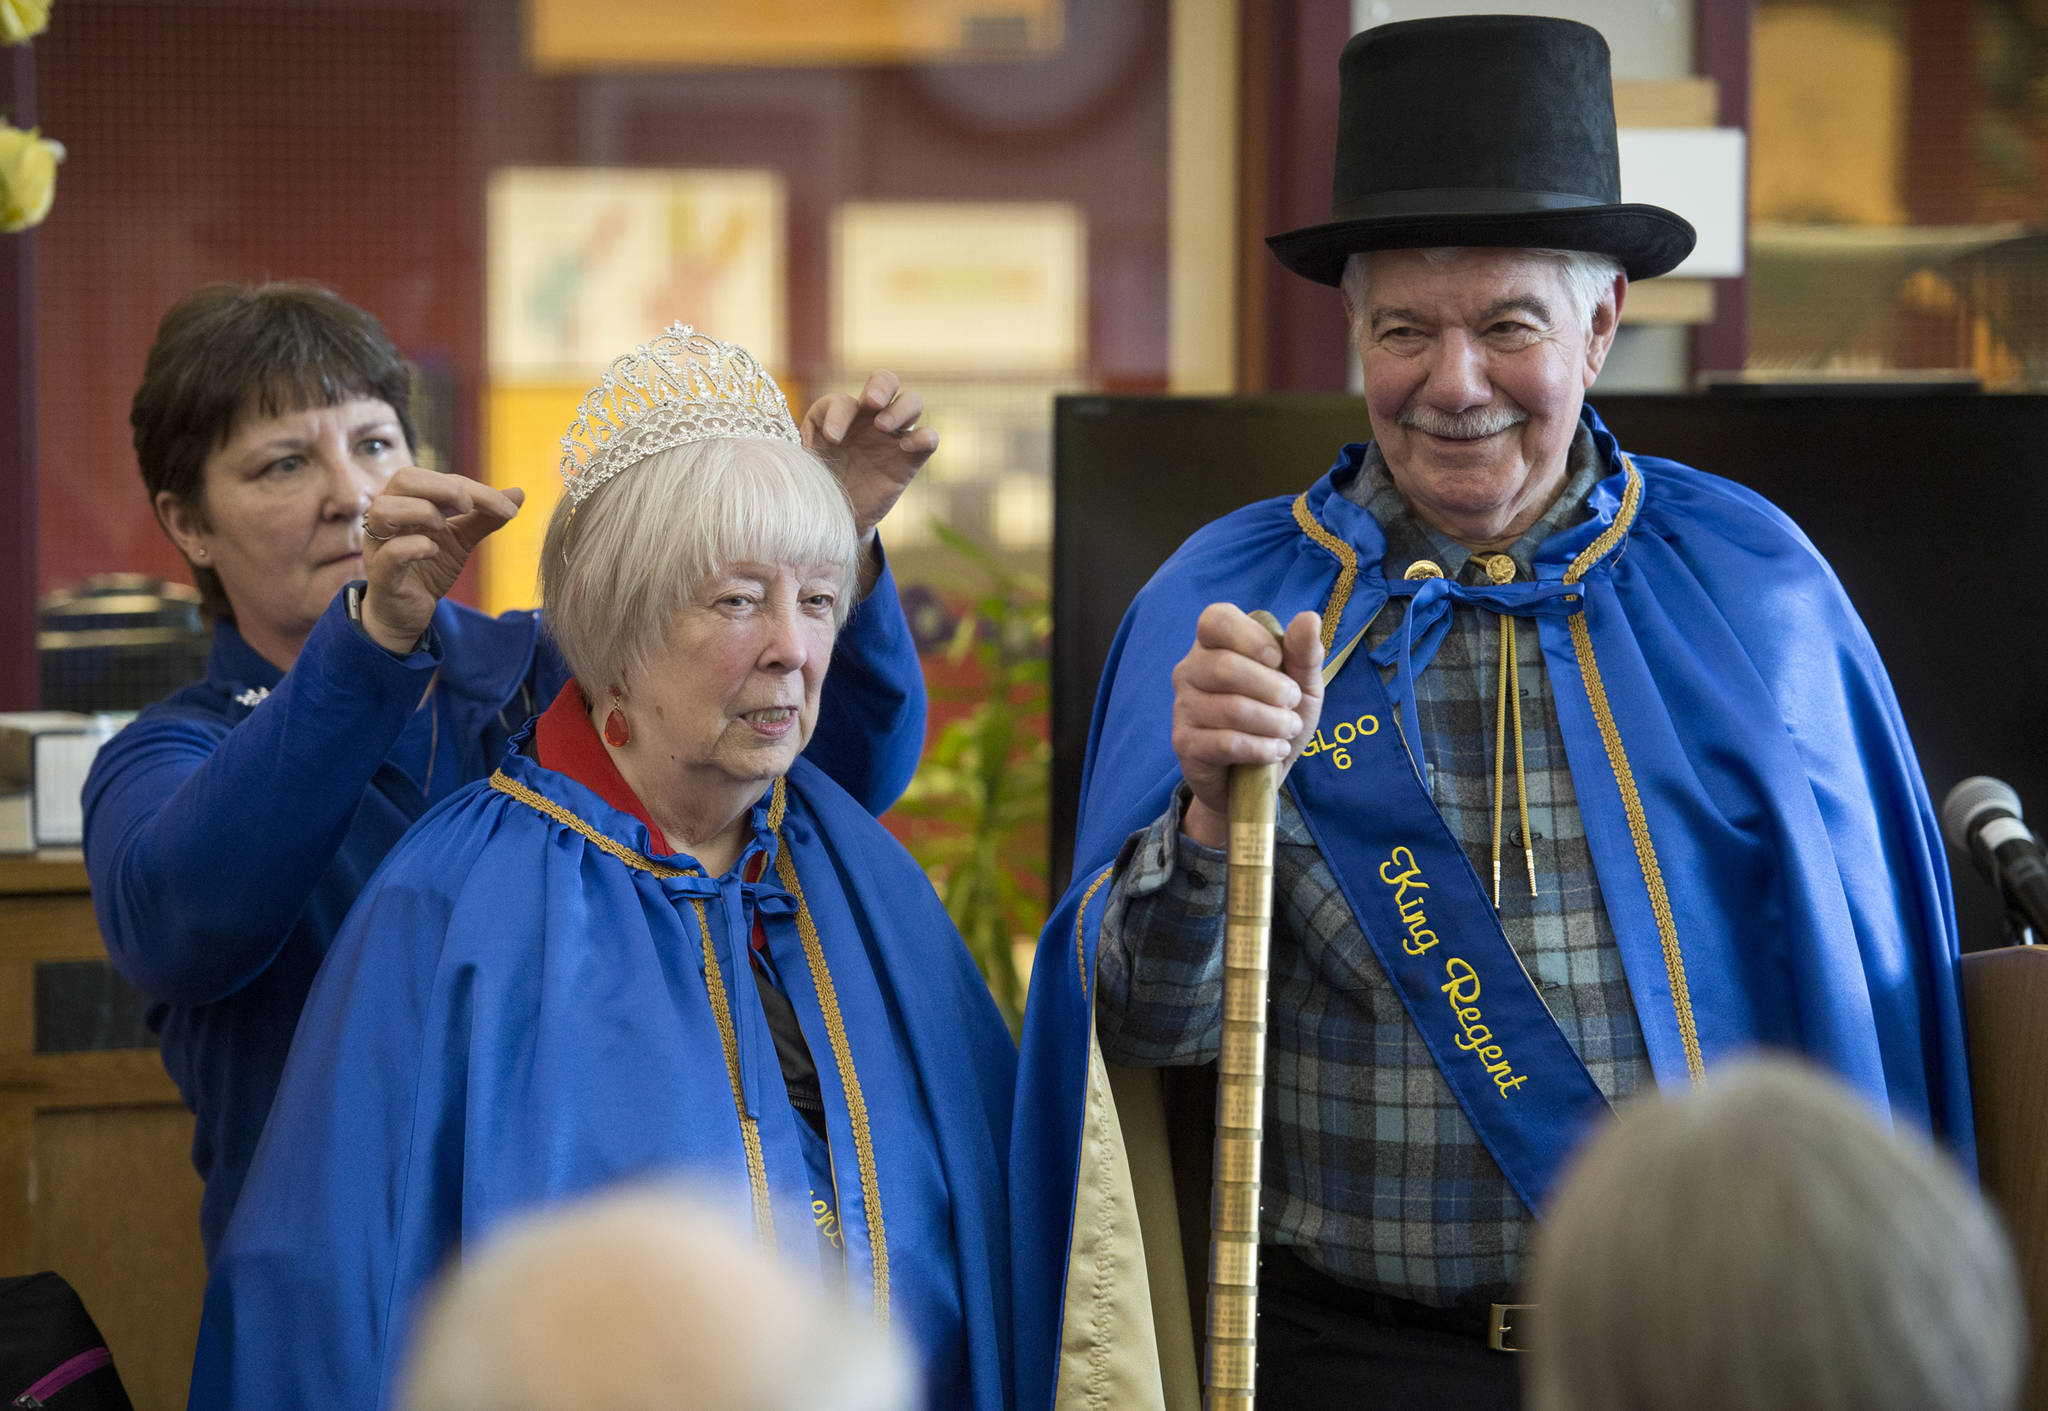 Terry and Dee Brenner are outfitted as King and Queen Regents of the Pioneers of Alaska by last year’s Queen, Carol Whelan, left, during a ceremony at the Juneau Pioneers Home on Saturday, May 13, 2017. (Michael Penn | Juneau Empire)